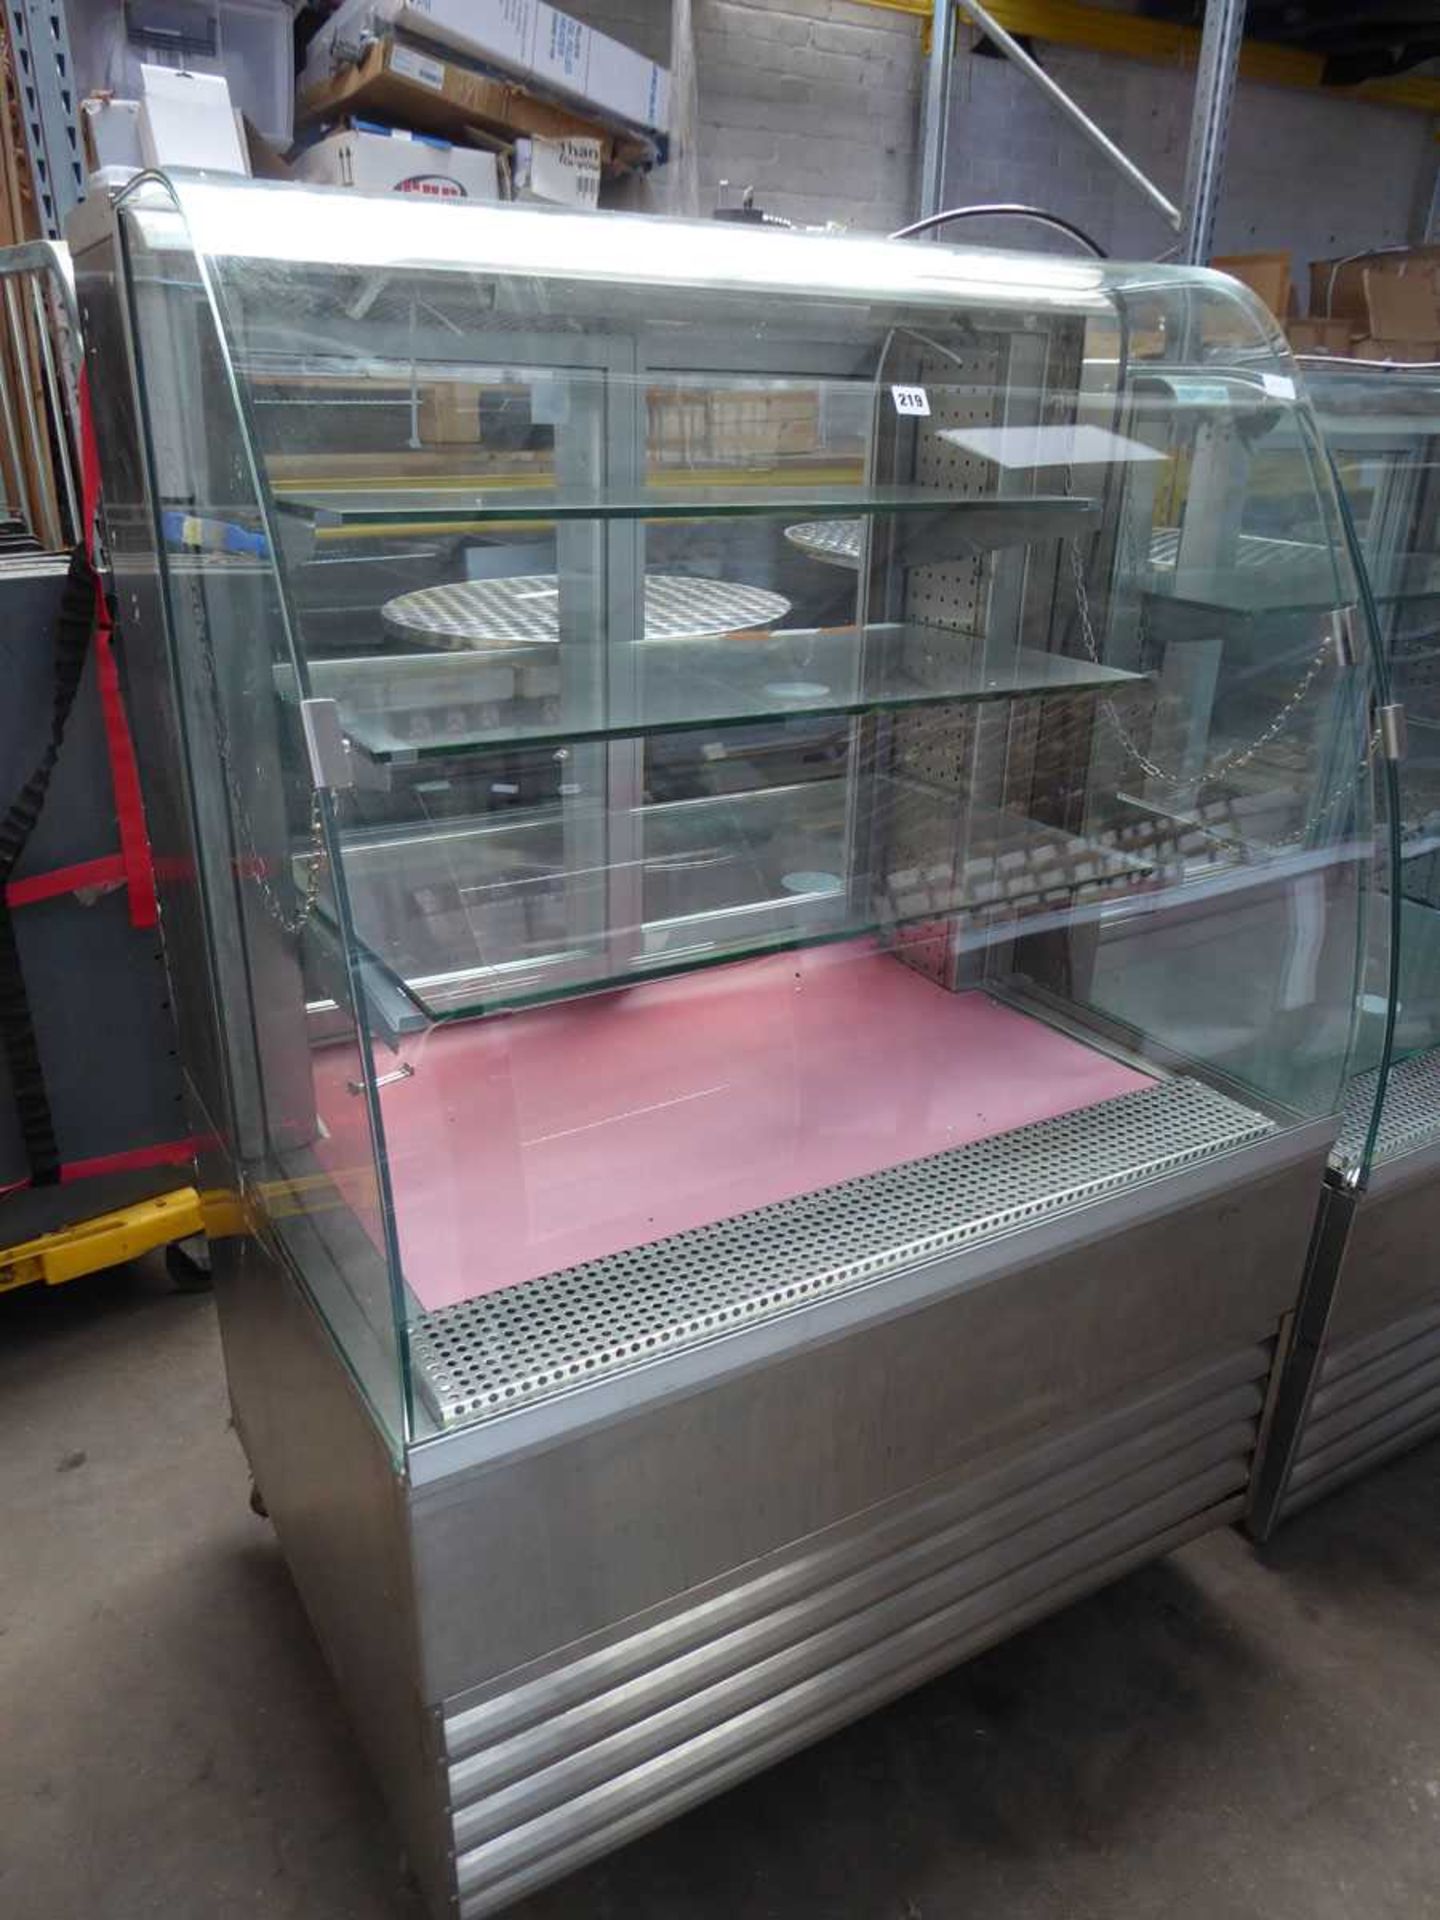 100cm Frostech model SP75/100 refrigerated display unit